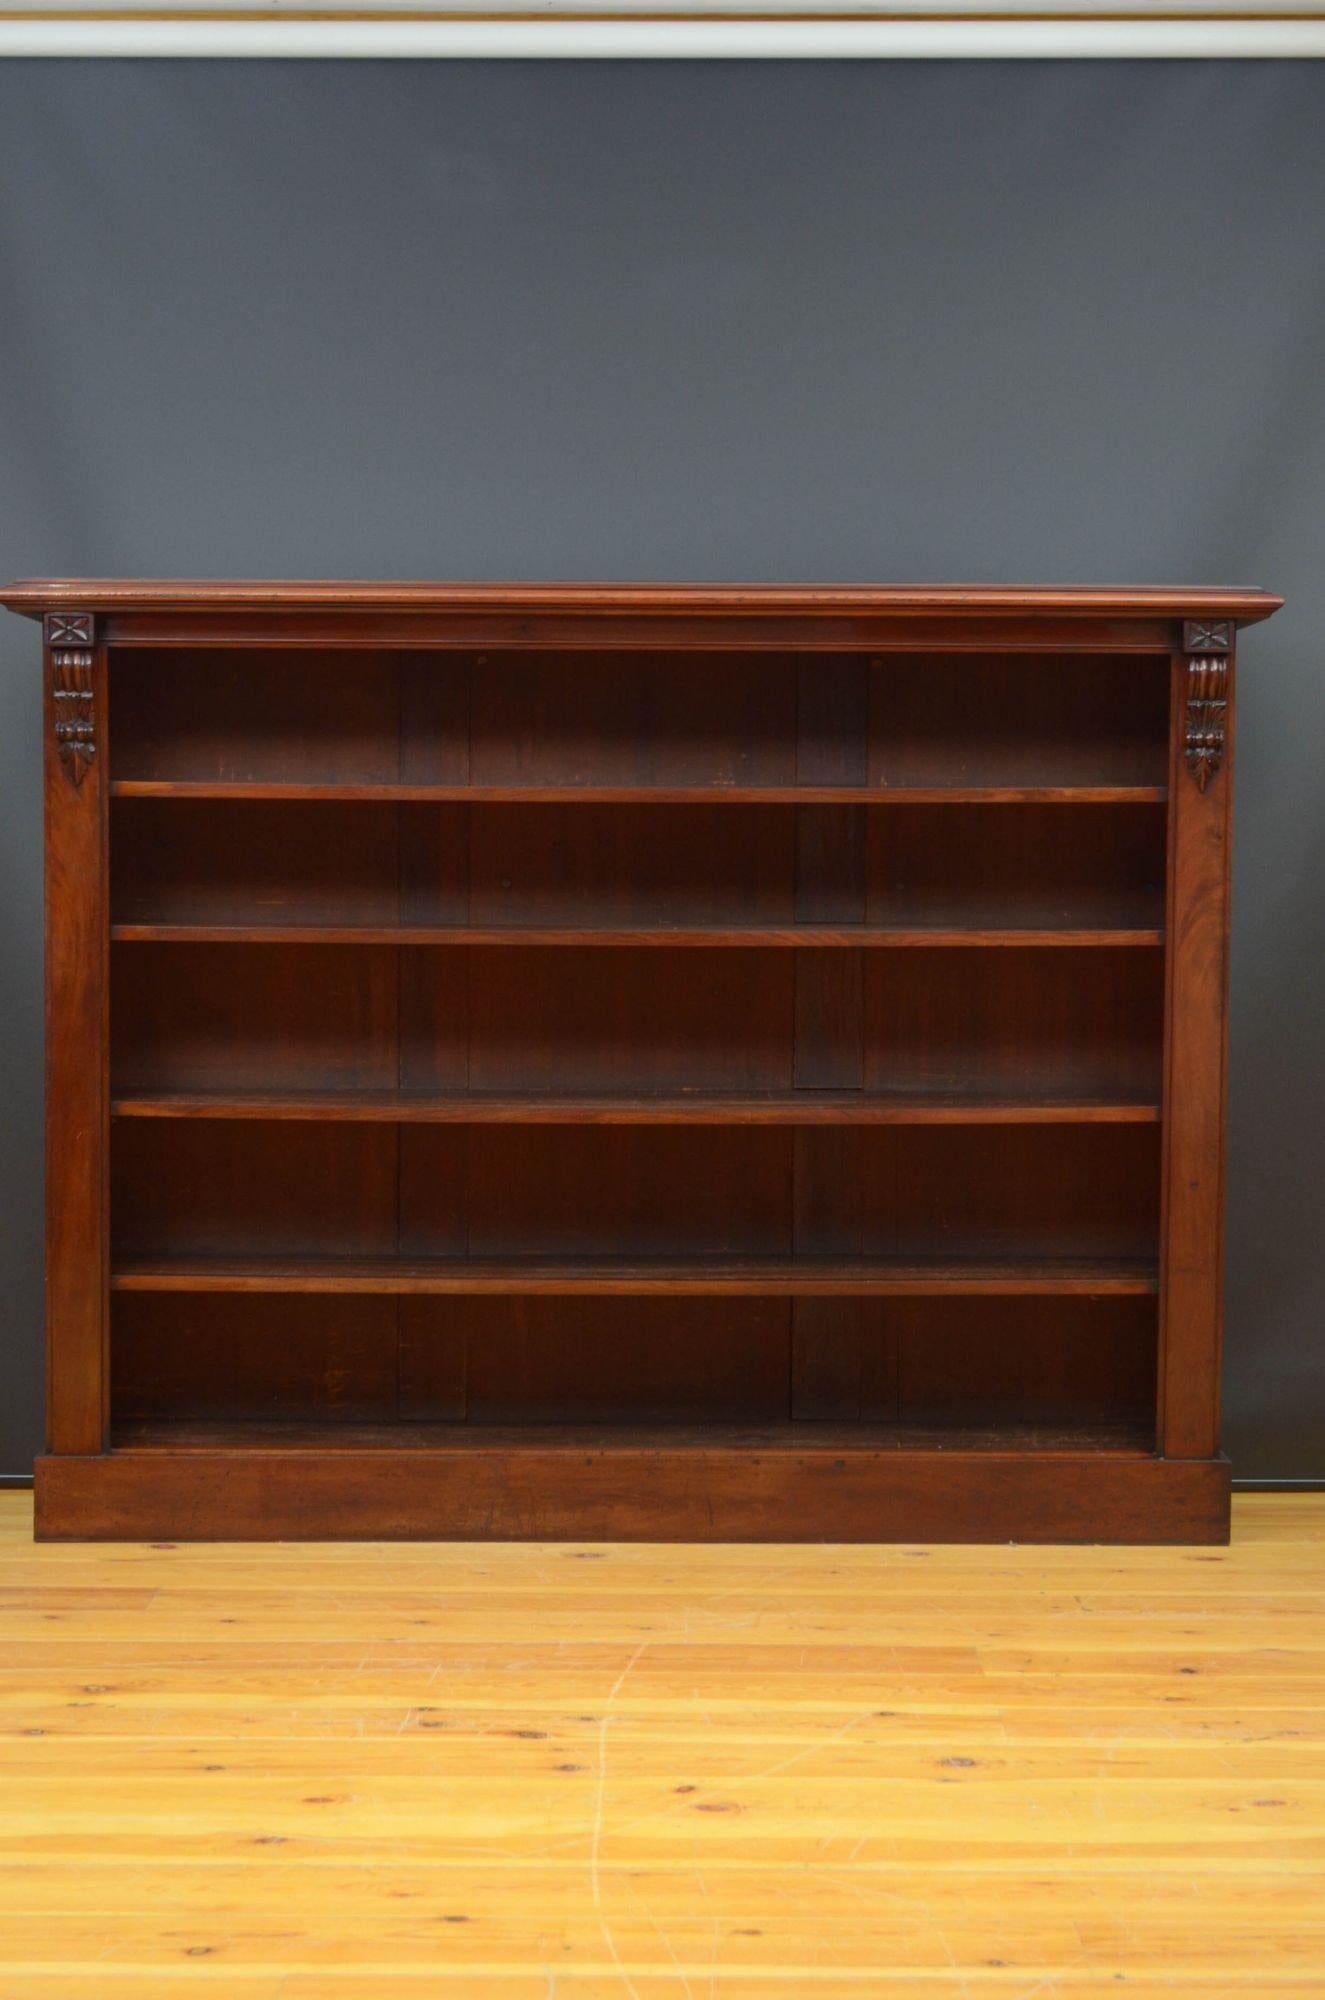 Sn5260 A large Victorian, mahogany open bookcase, having figured mahogany oversailing top with moulded edge above four fixed shelves, all flanked by pilasters with decorative drop carvings, standing on plinth base. This antique bookcase retains its